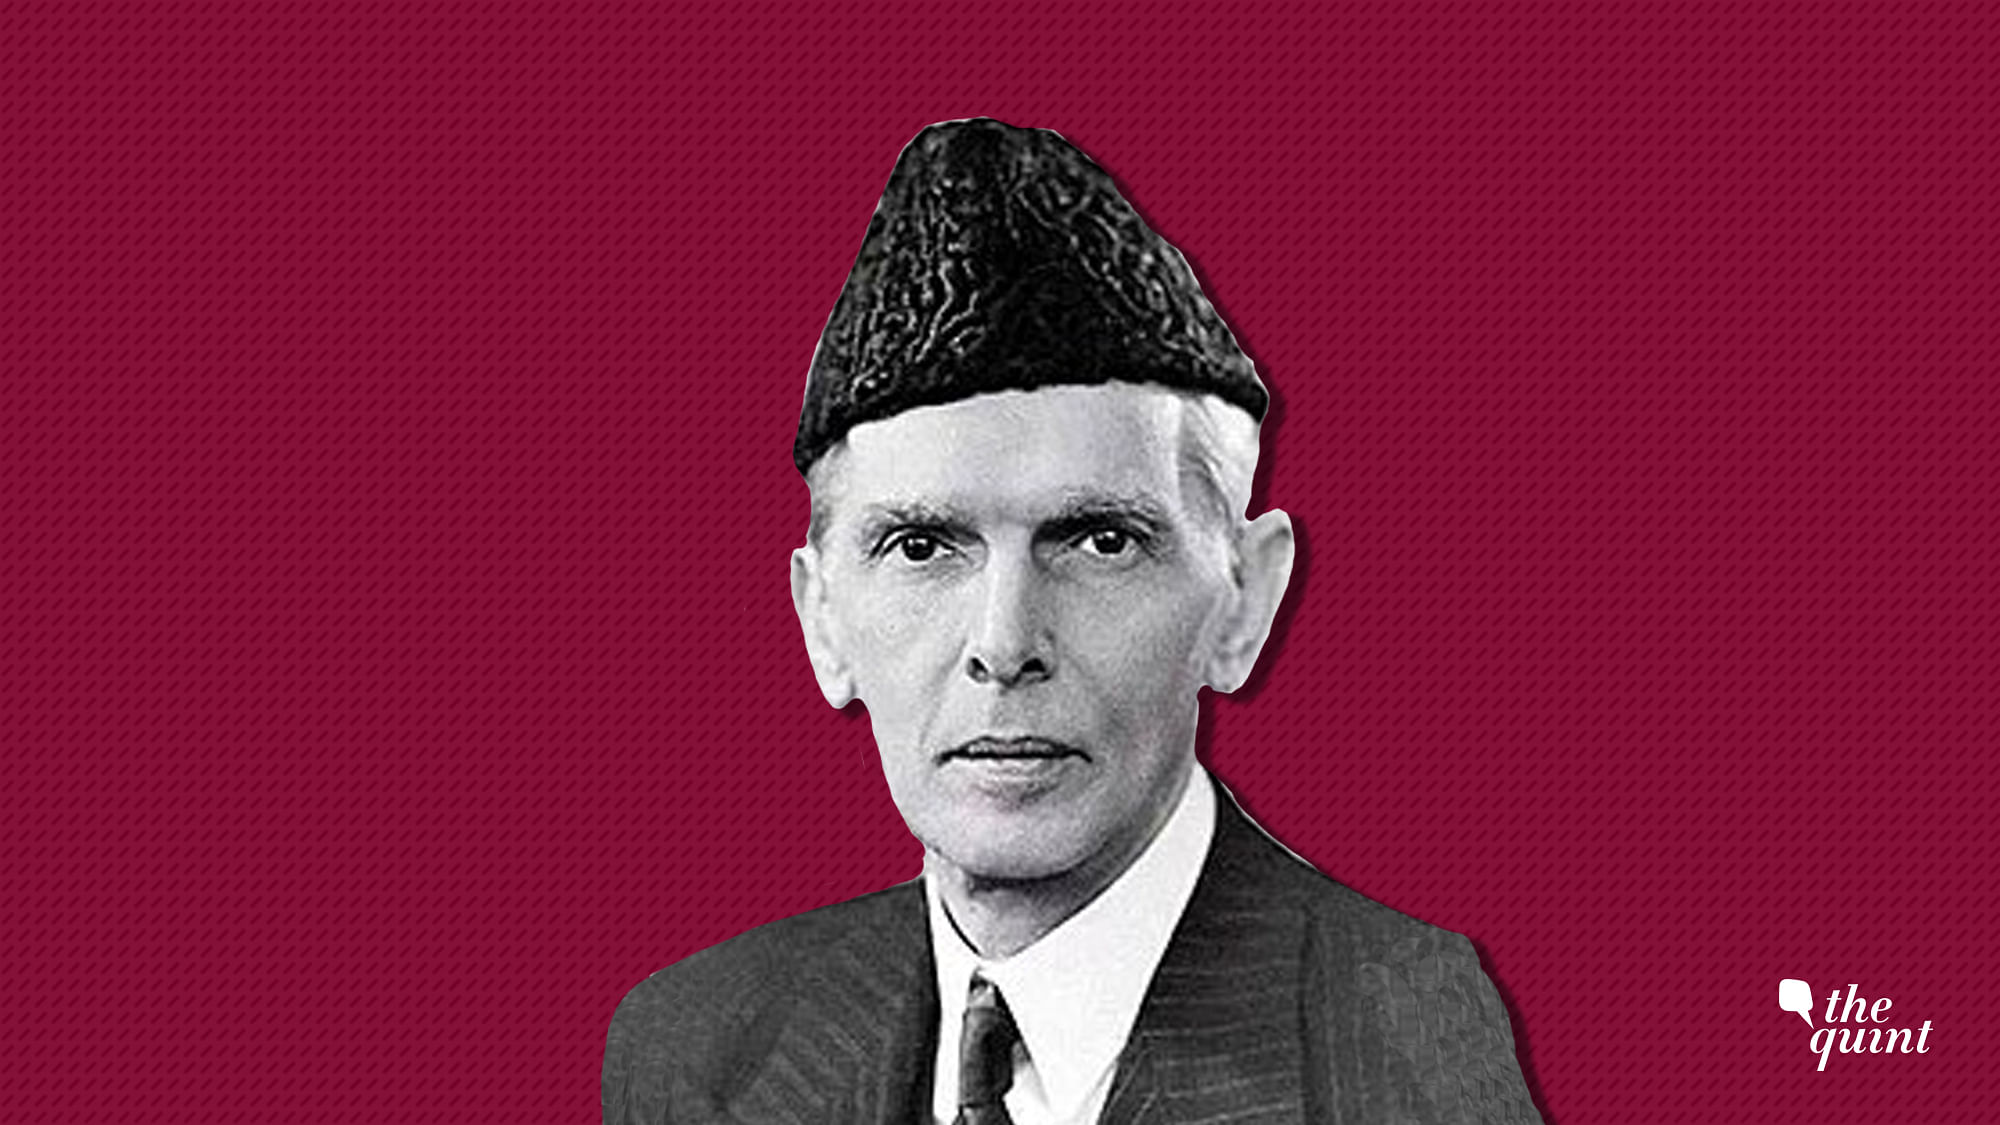 Who is the real MA Jinnah? Jinnah, who single handedly created Pakistan, or the man referred to as  the “apostle of Hindu-Muslim” unity.